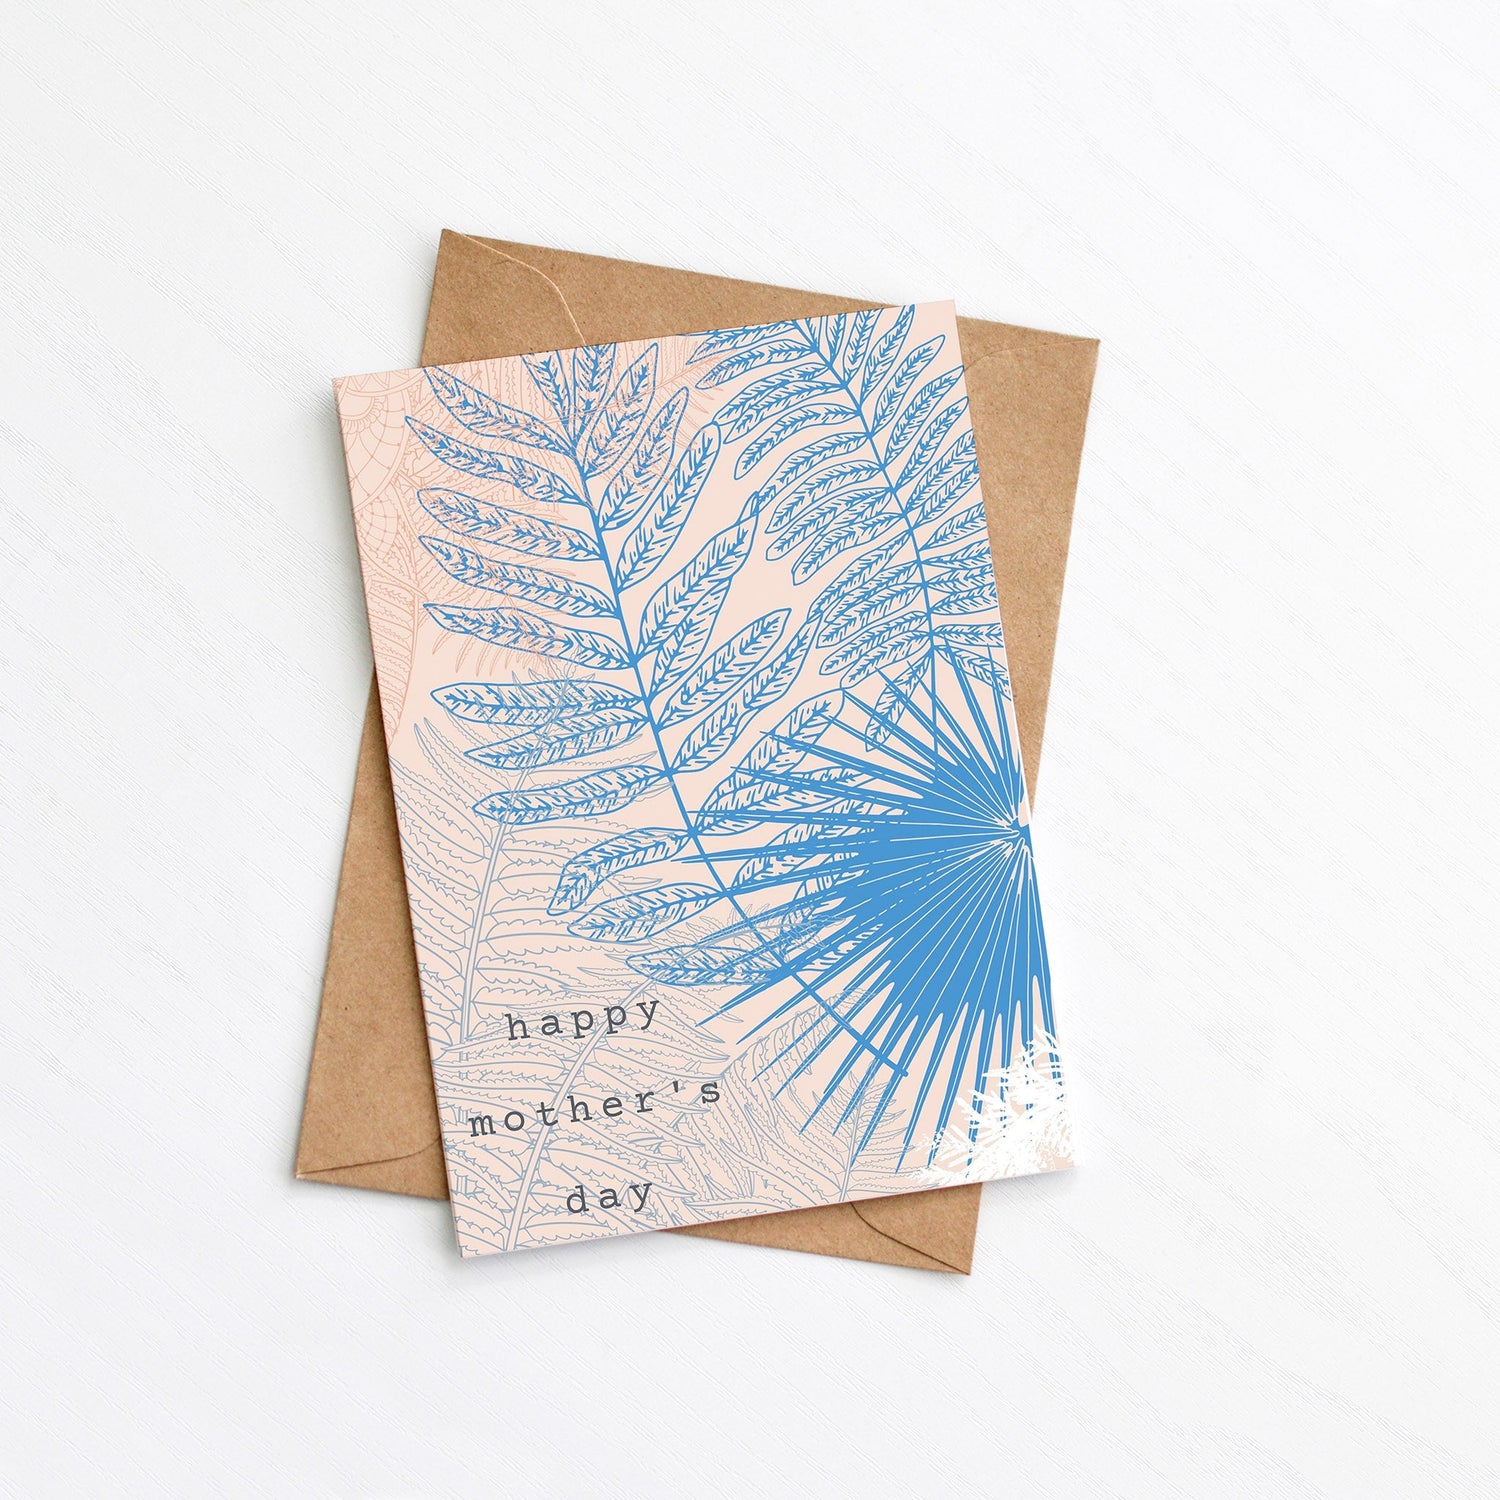 Mother's Day Cards | greenwichpaperstudio